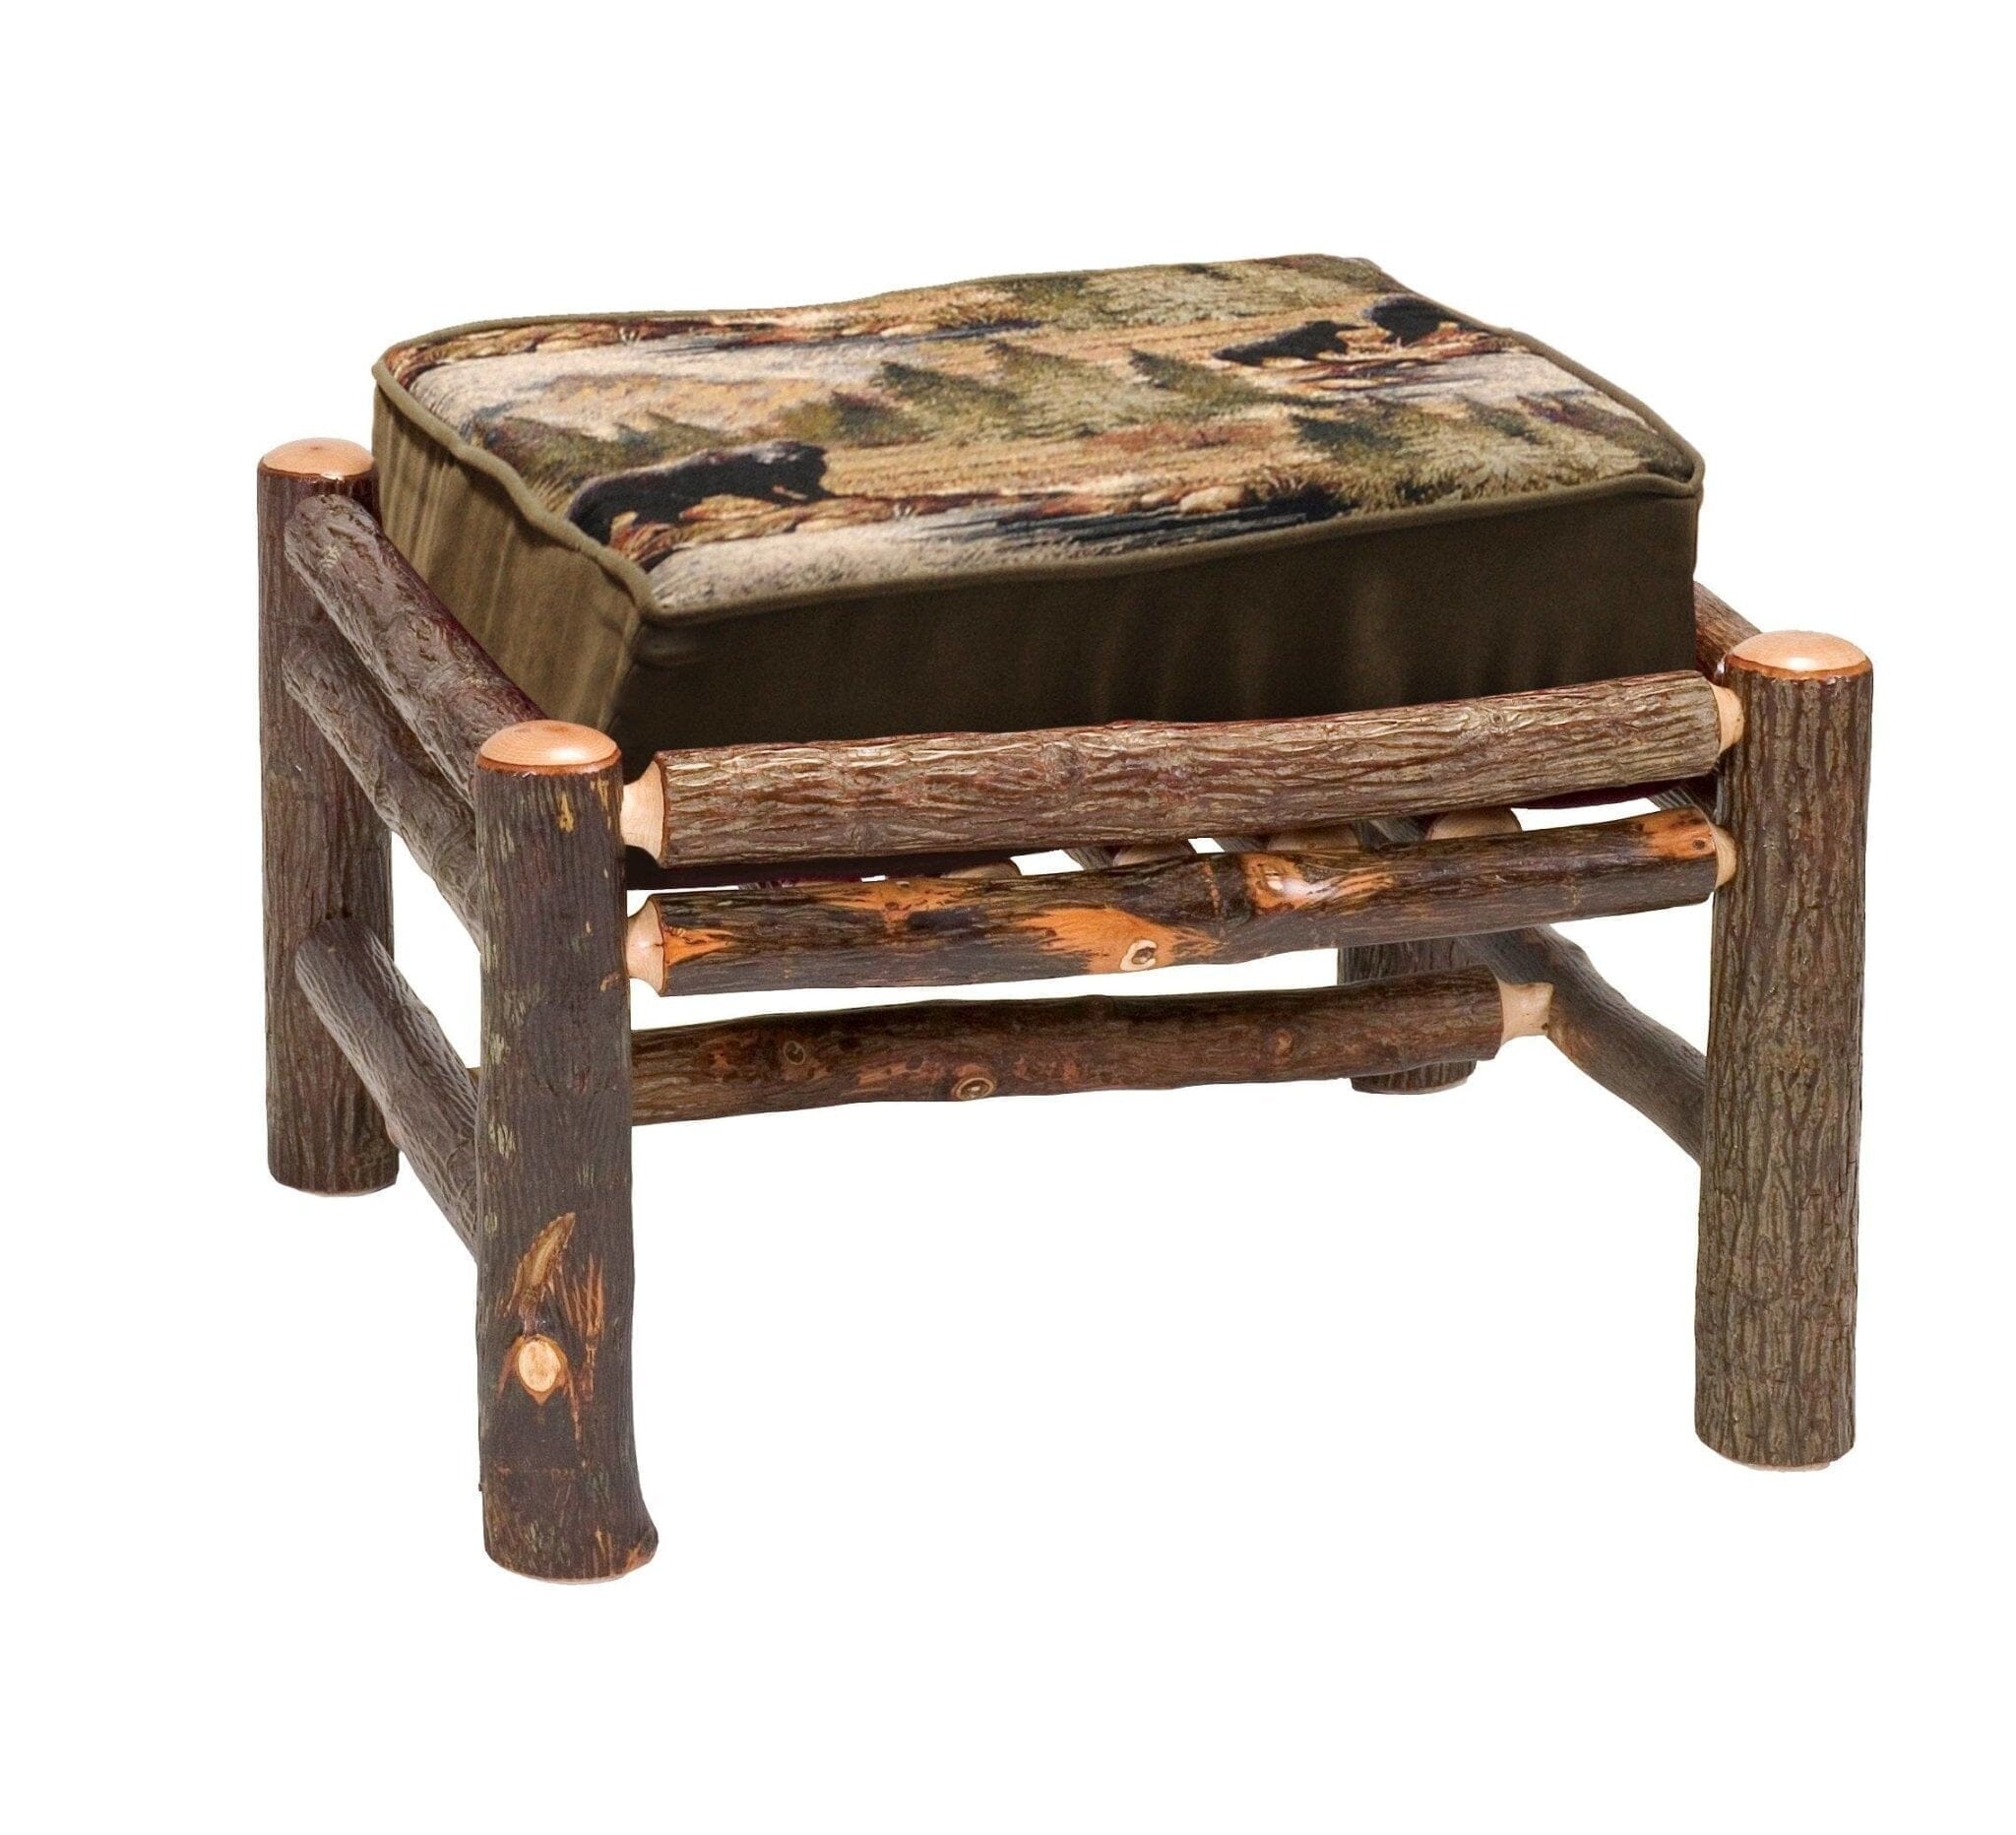 Natural Hickory Log Frame Ottoman - Lounge Chair - Includes Fabric